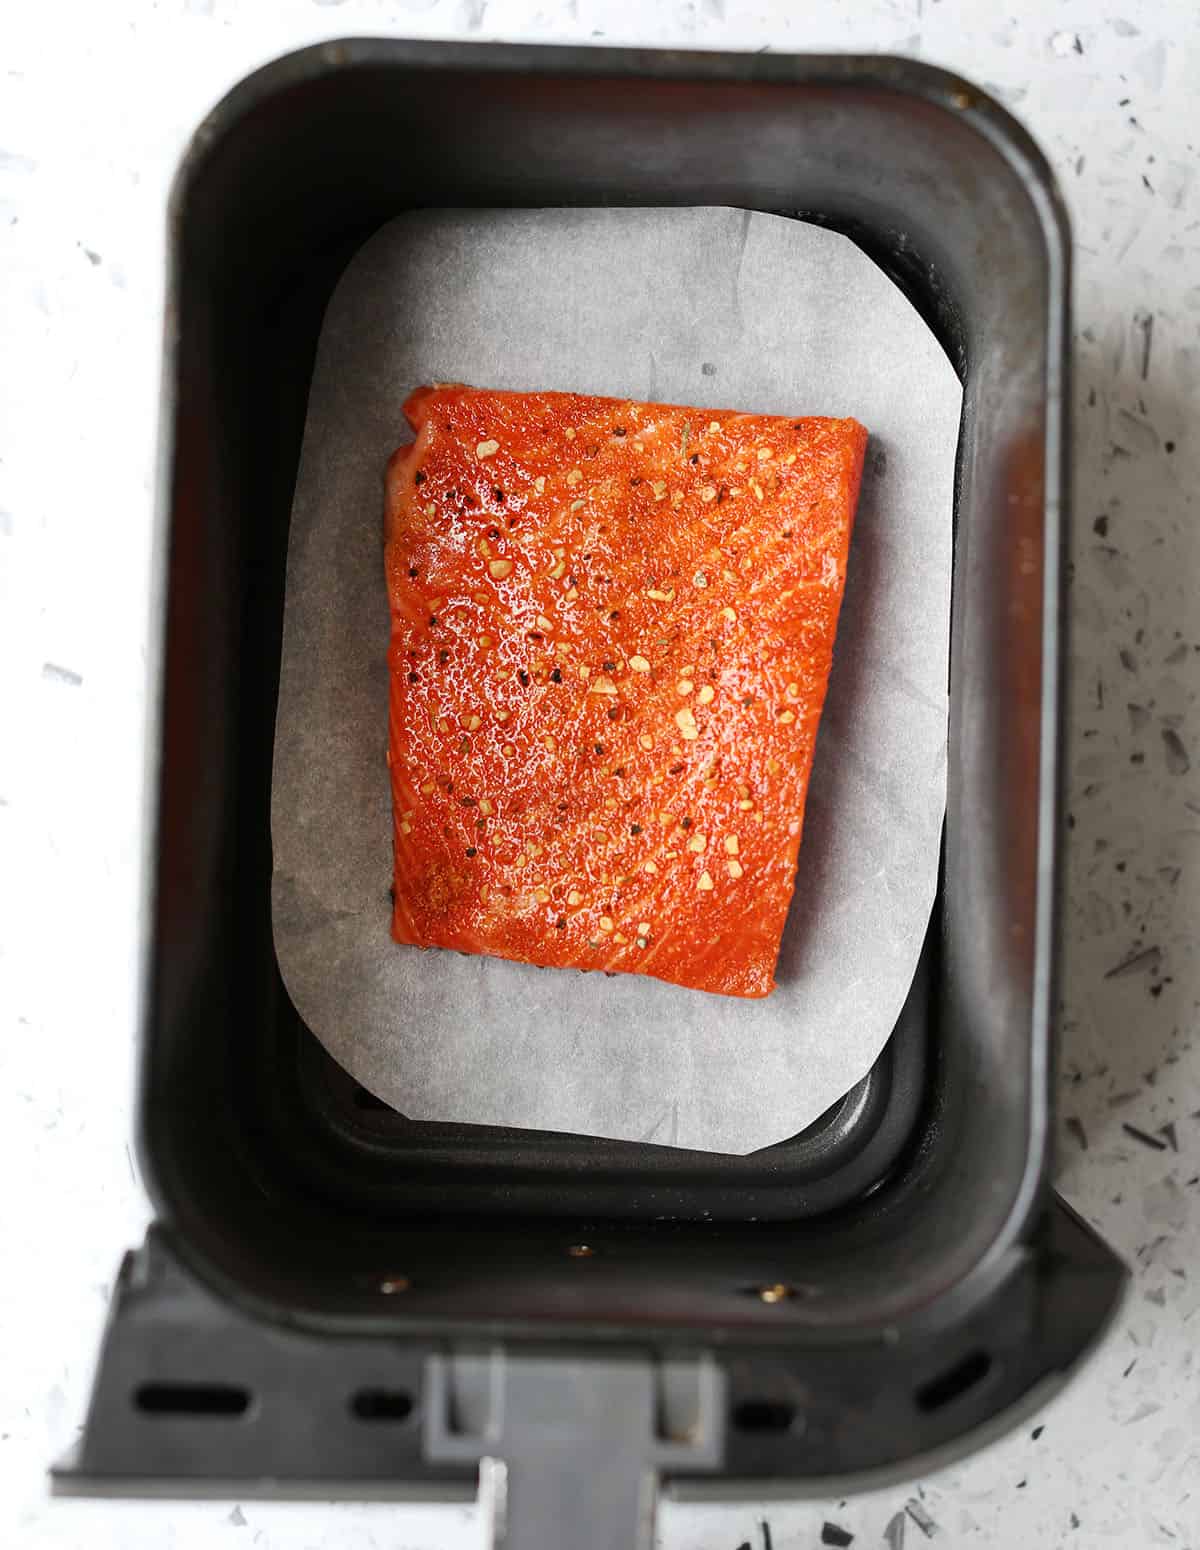 https://abeautifulmess.com/wp-content/uploads/2022/01/how-to-air-fry-salmon-with-parchment-paper.jpg